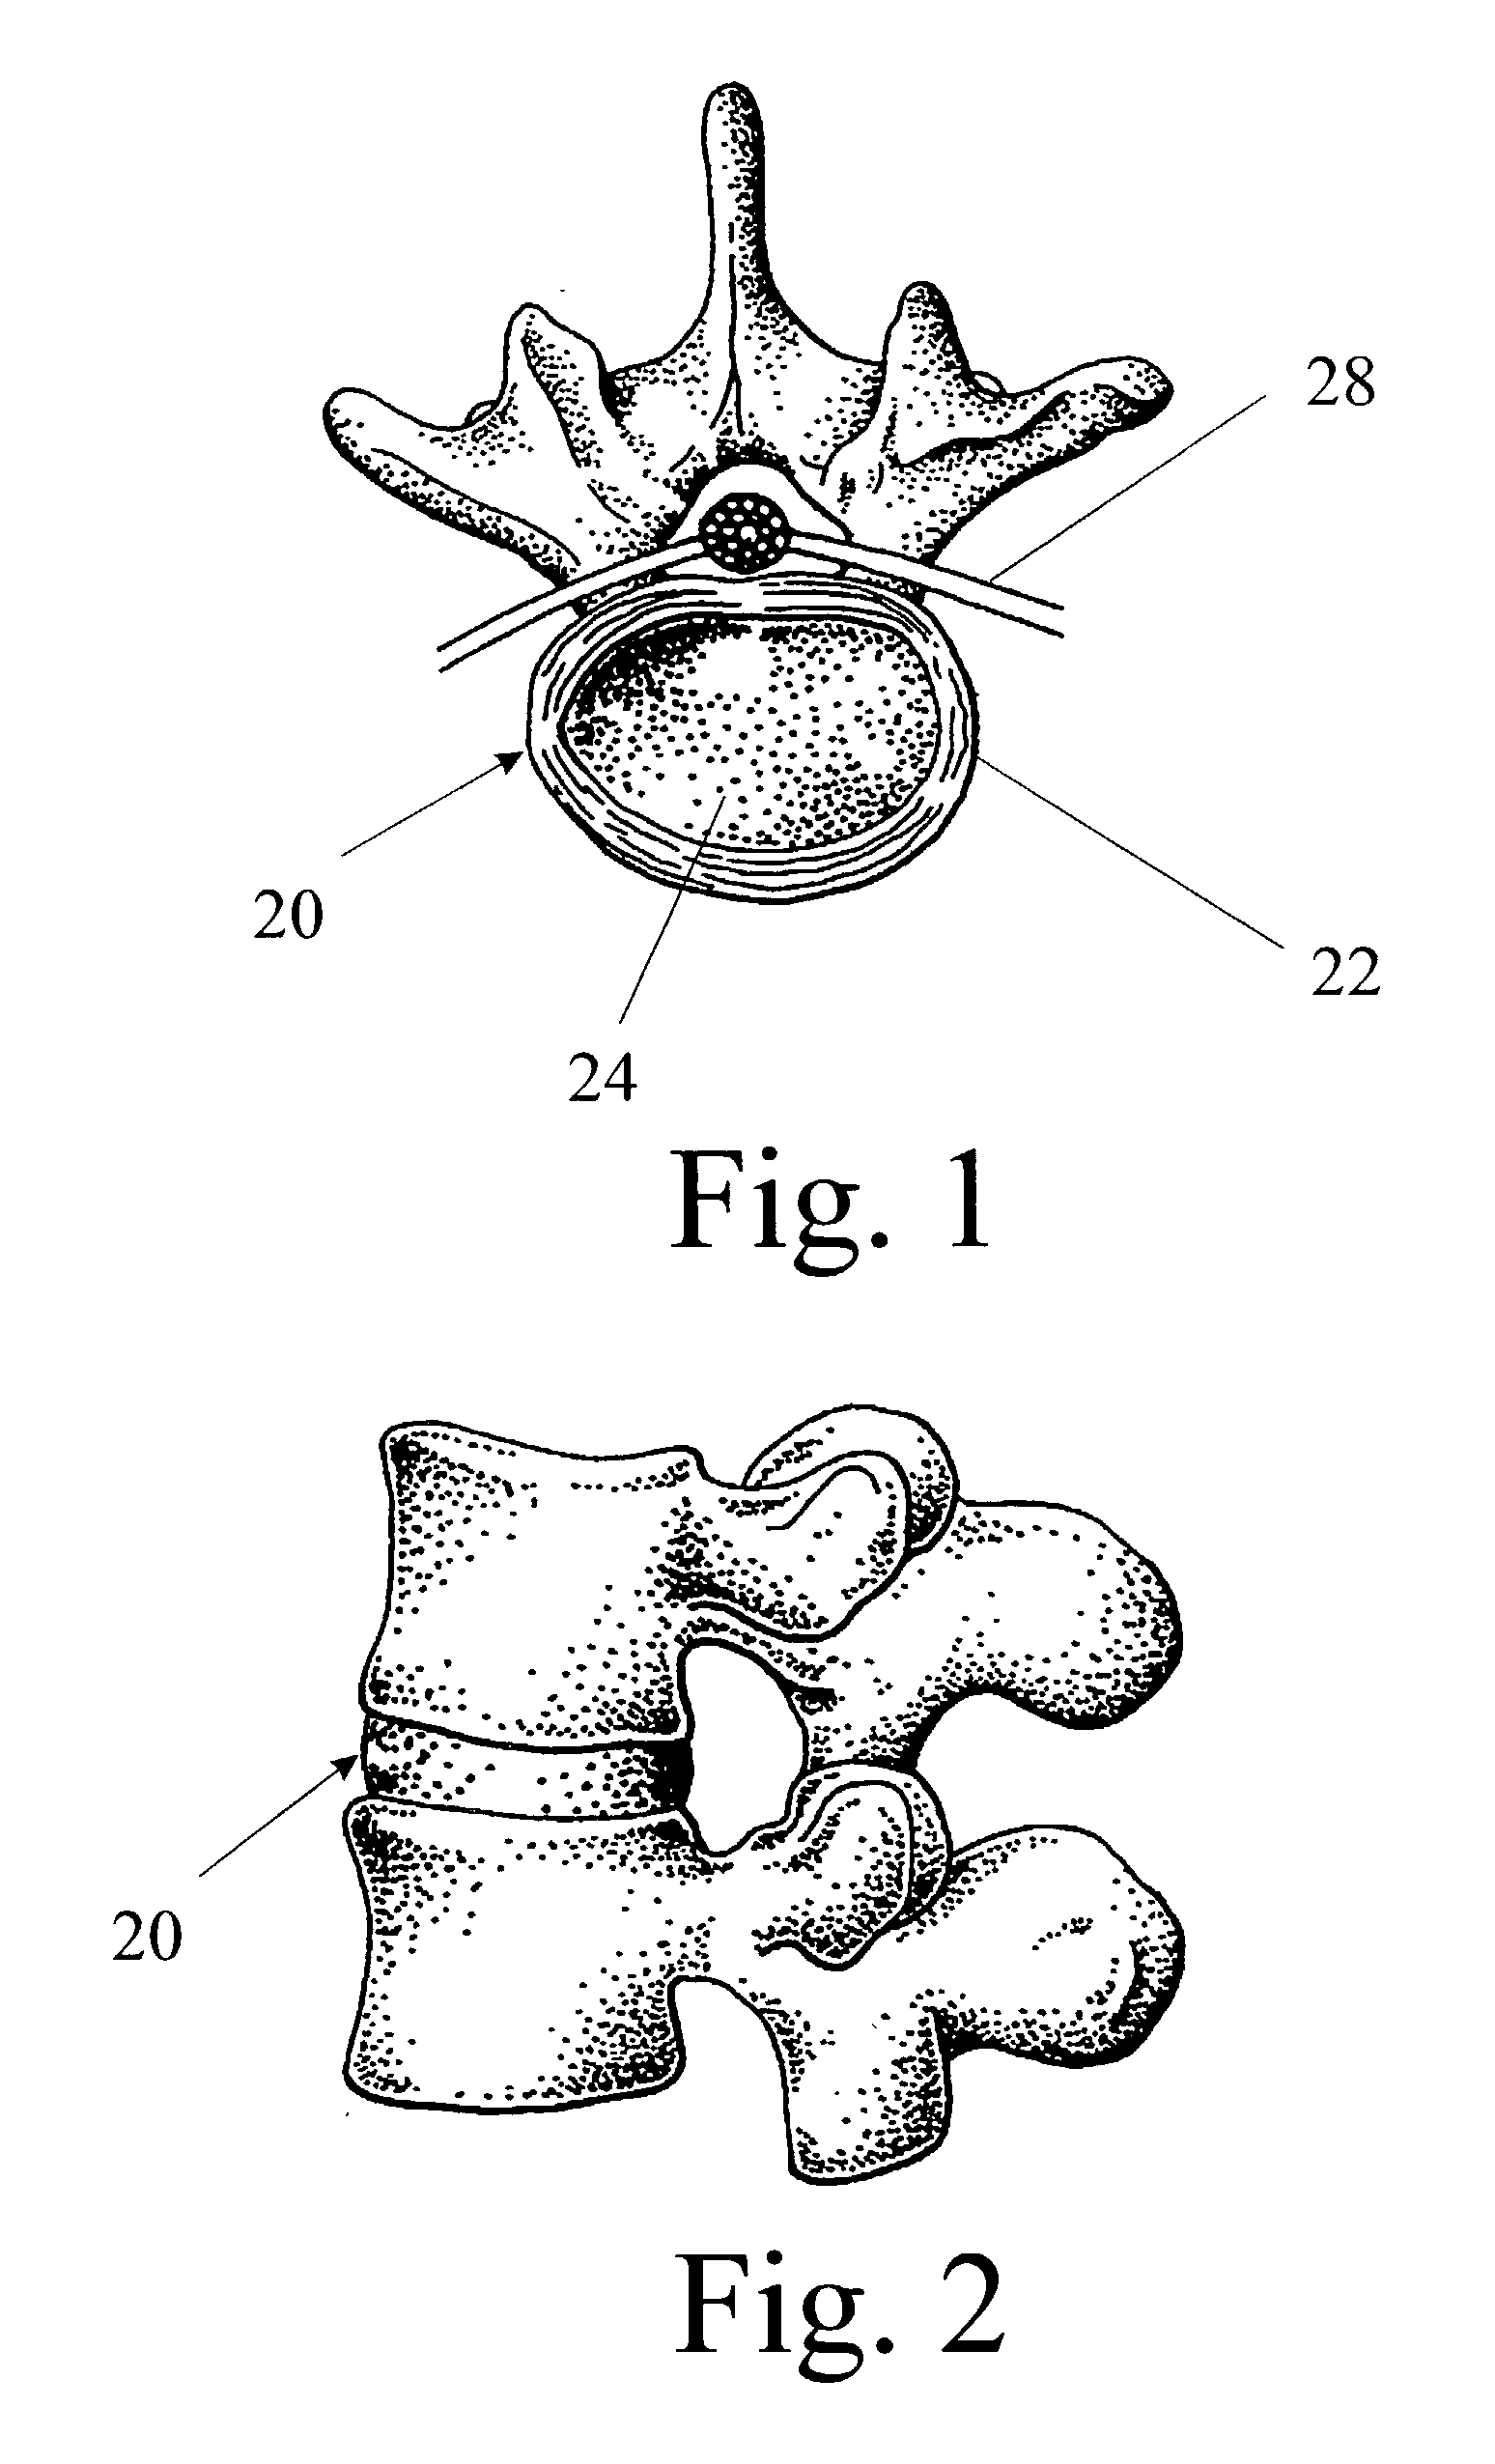 Multiportal device and method for percutaneous surgery